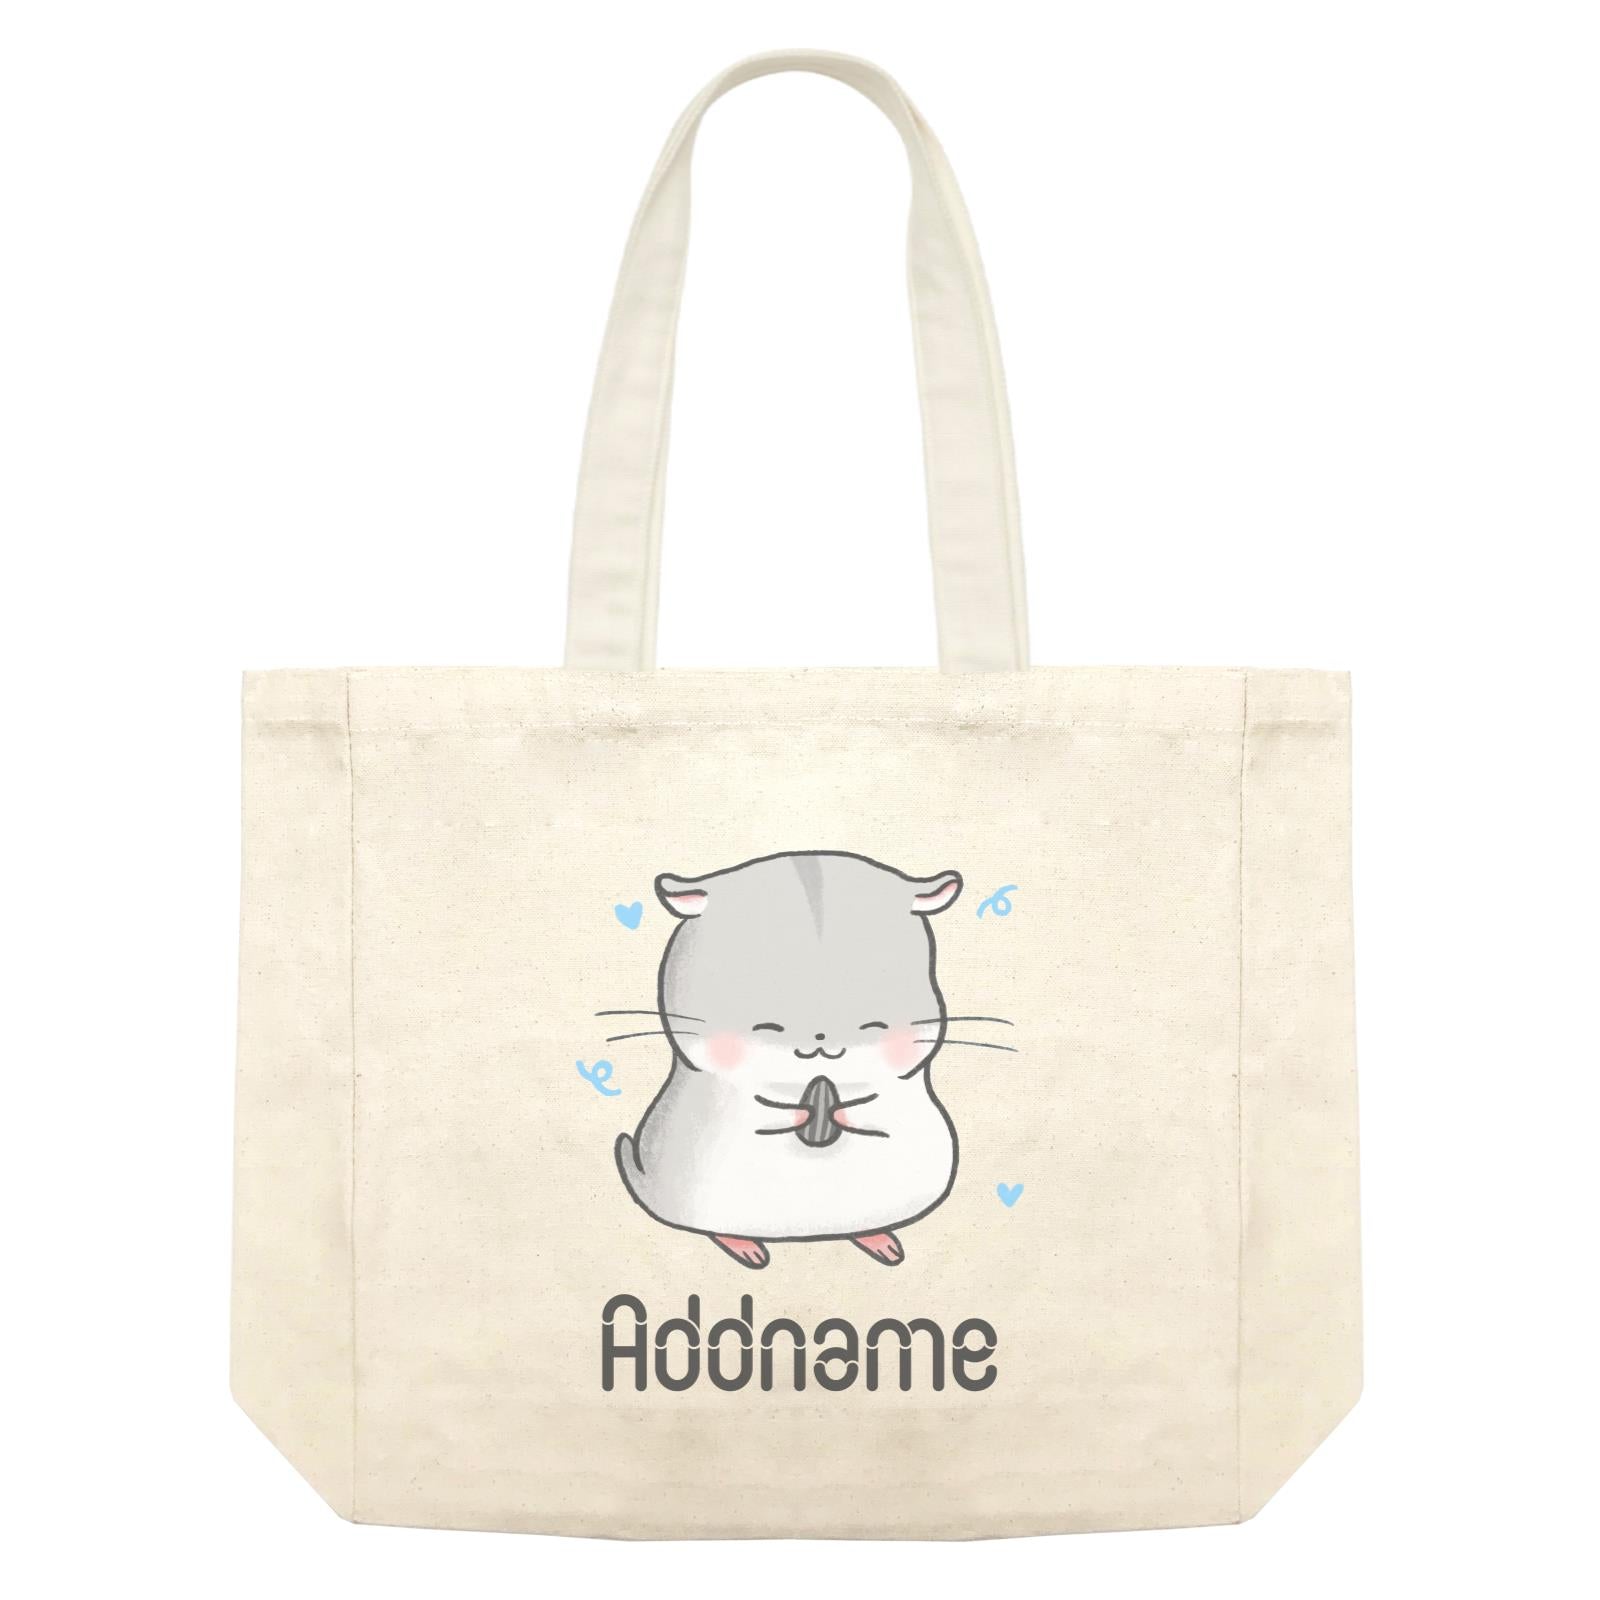 Cute Hand Drawn Style Hamster Addname Shopping Bag